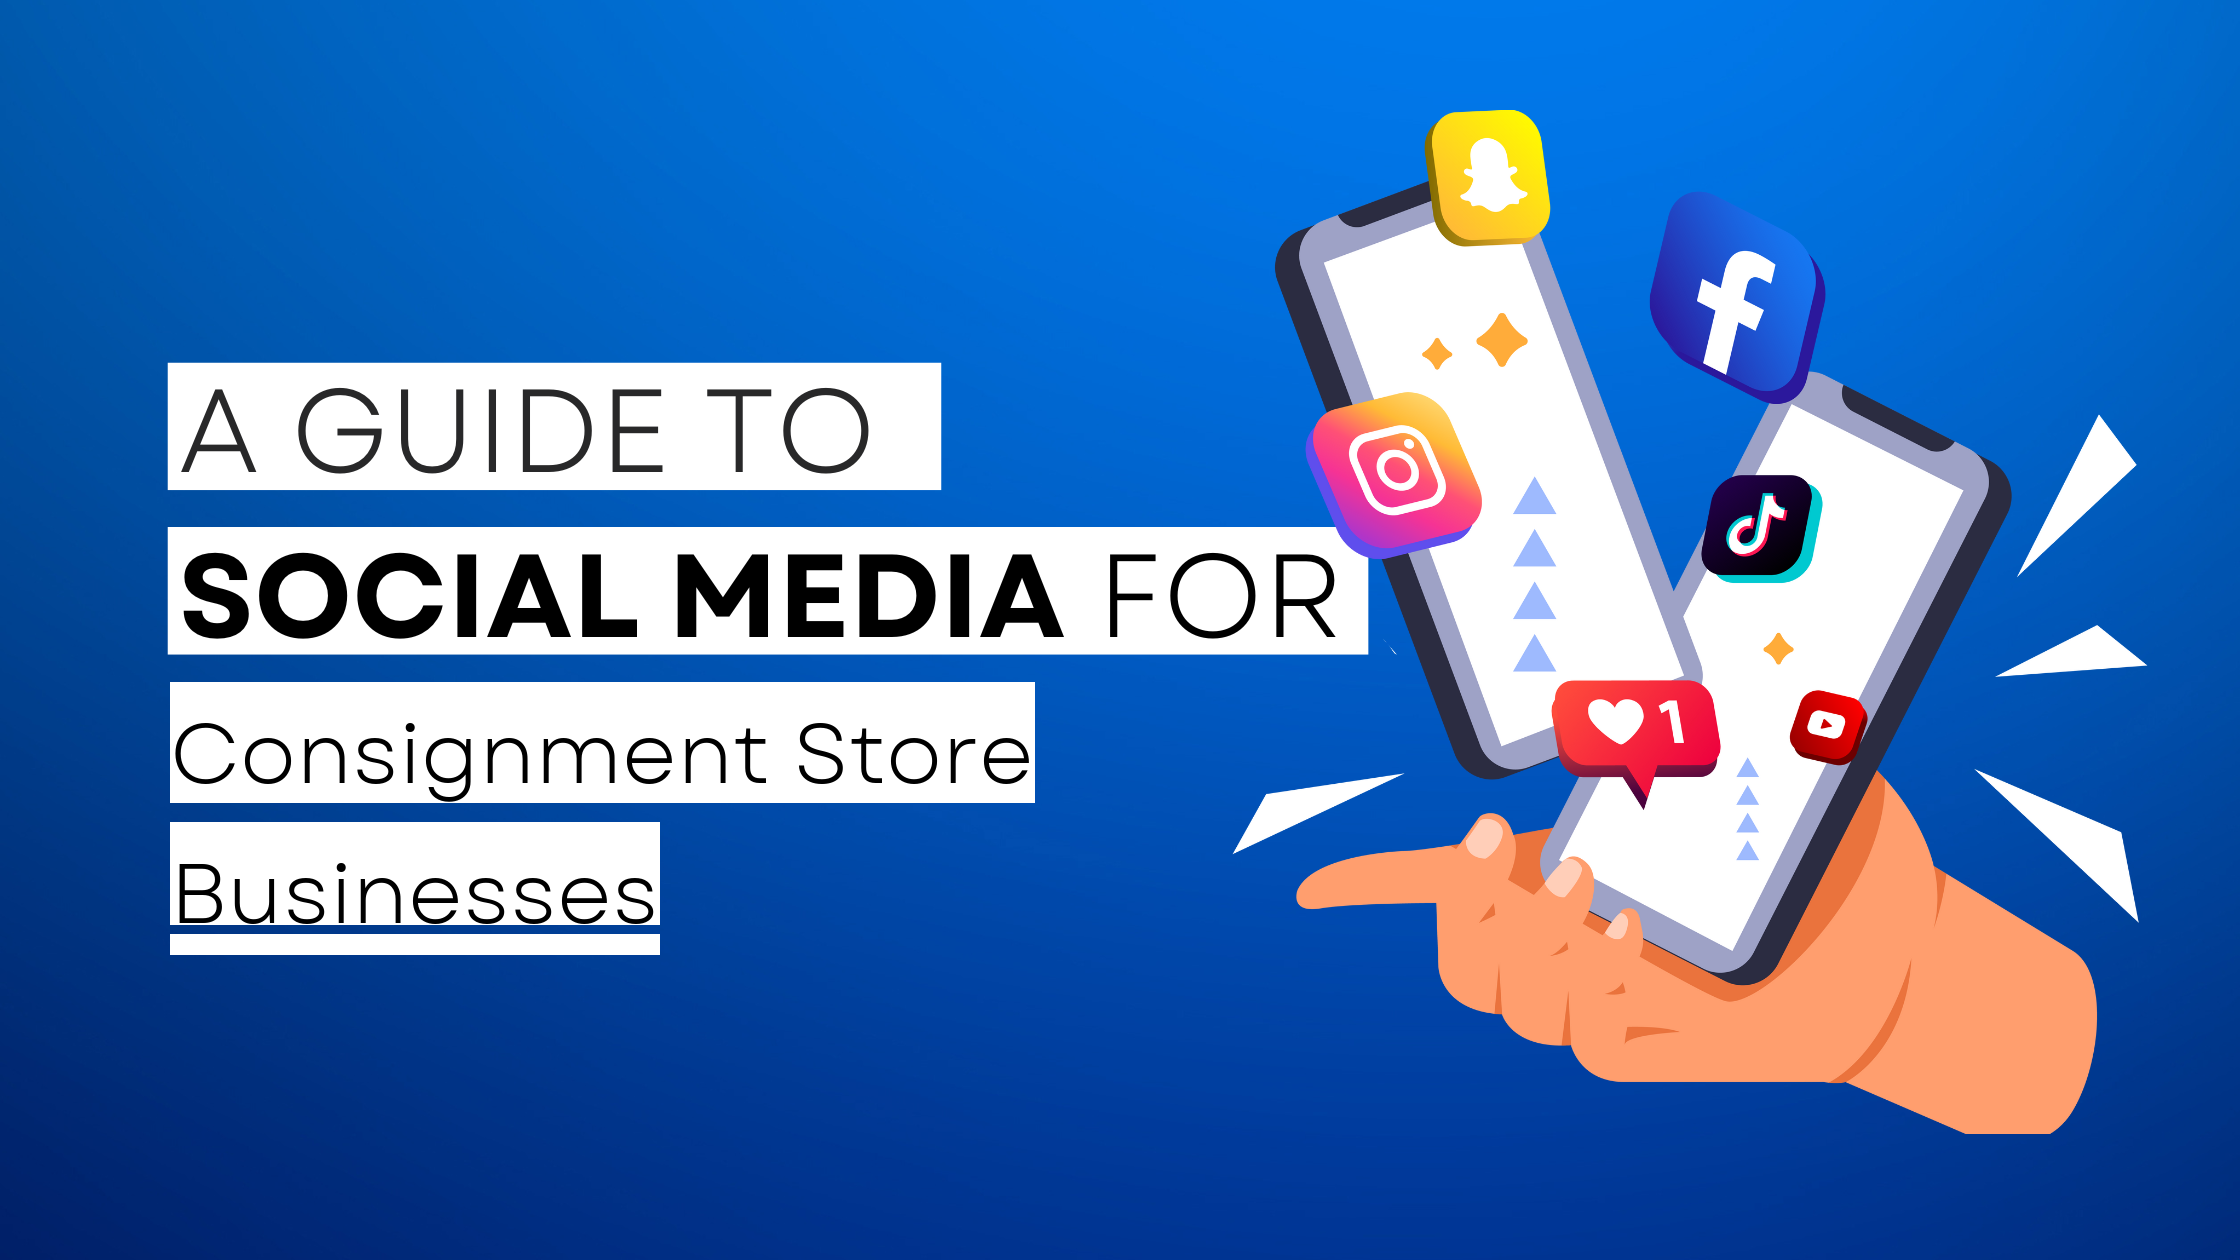 How to start Consignment Store on social media